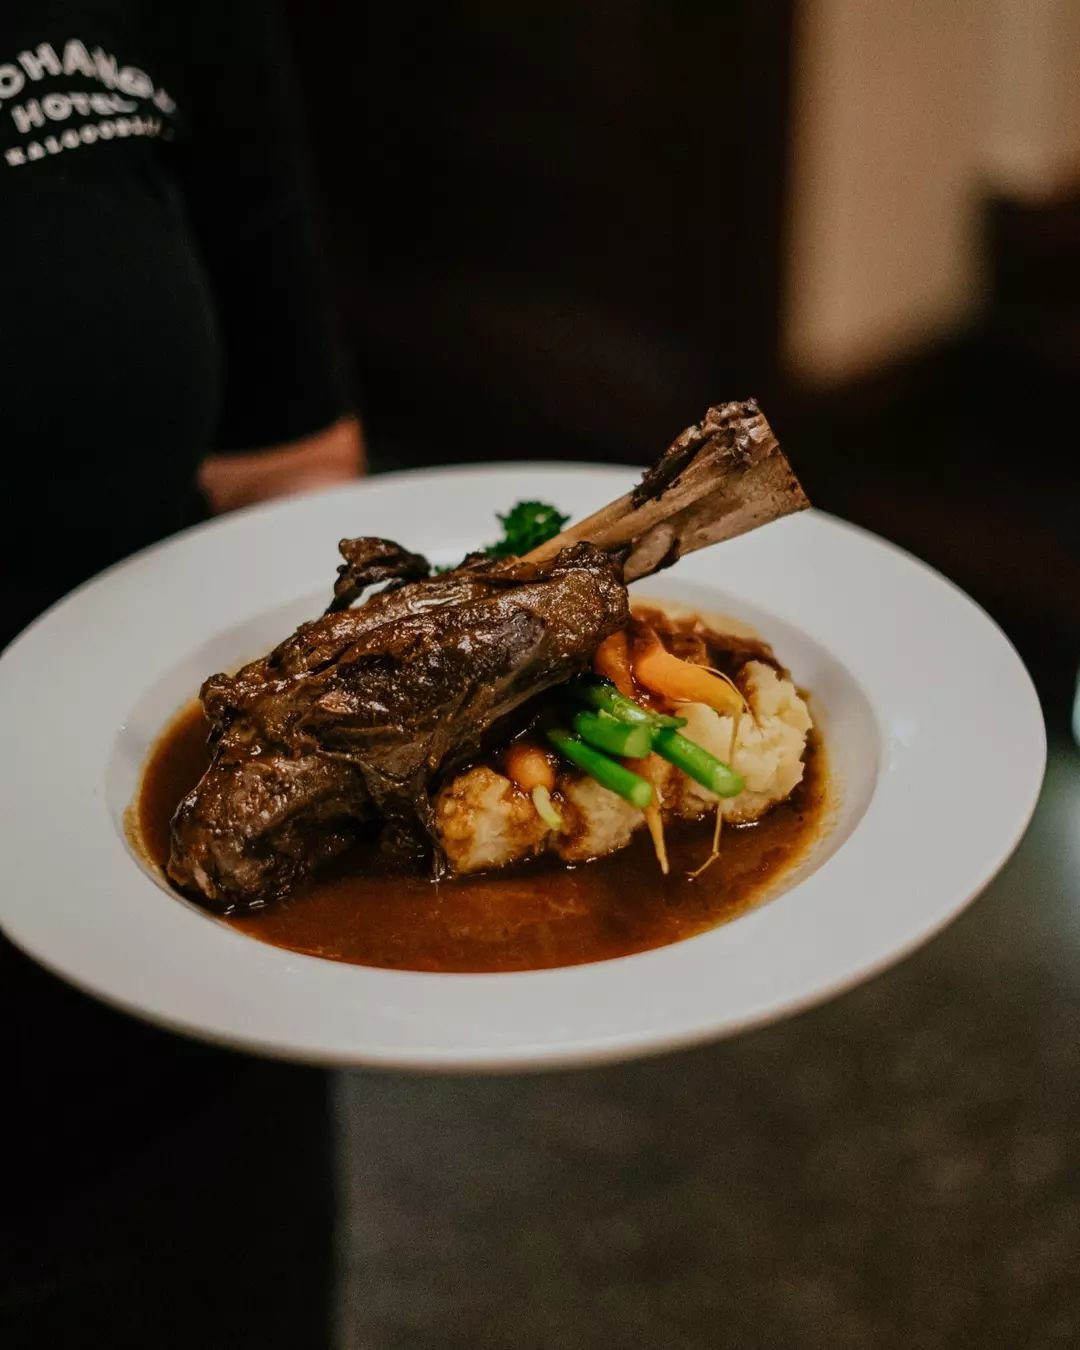 Don't miss out on our Lamb Shank Special! Available every Wednesday for just $25.

To check out our daily specials follow the link in our bio.